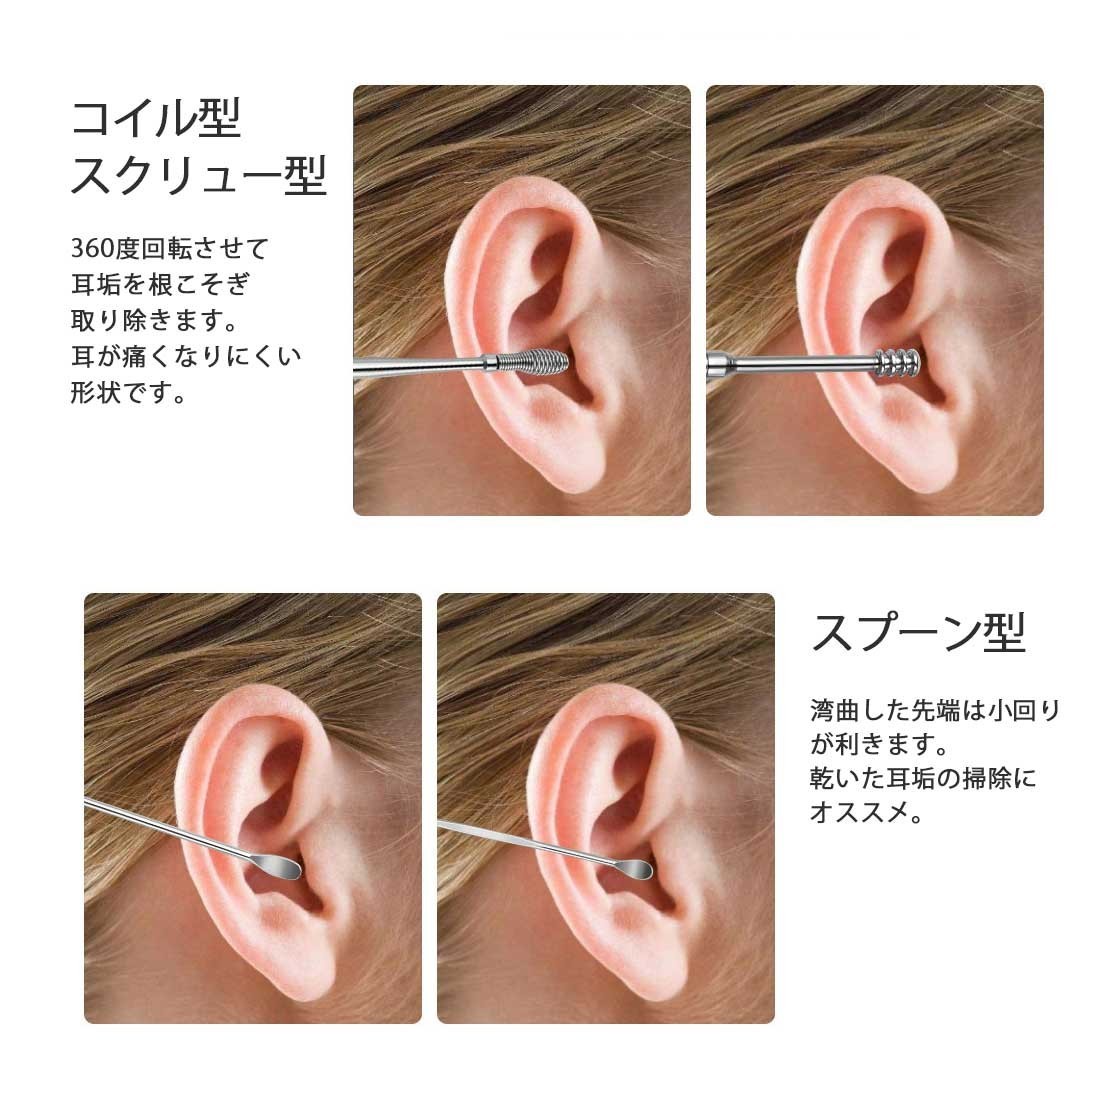  ear ..6 pcs set PU case black storage case attaching stainless steel ear cleaning ear .. year cleaner ....